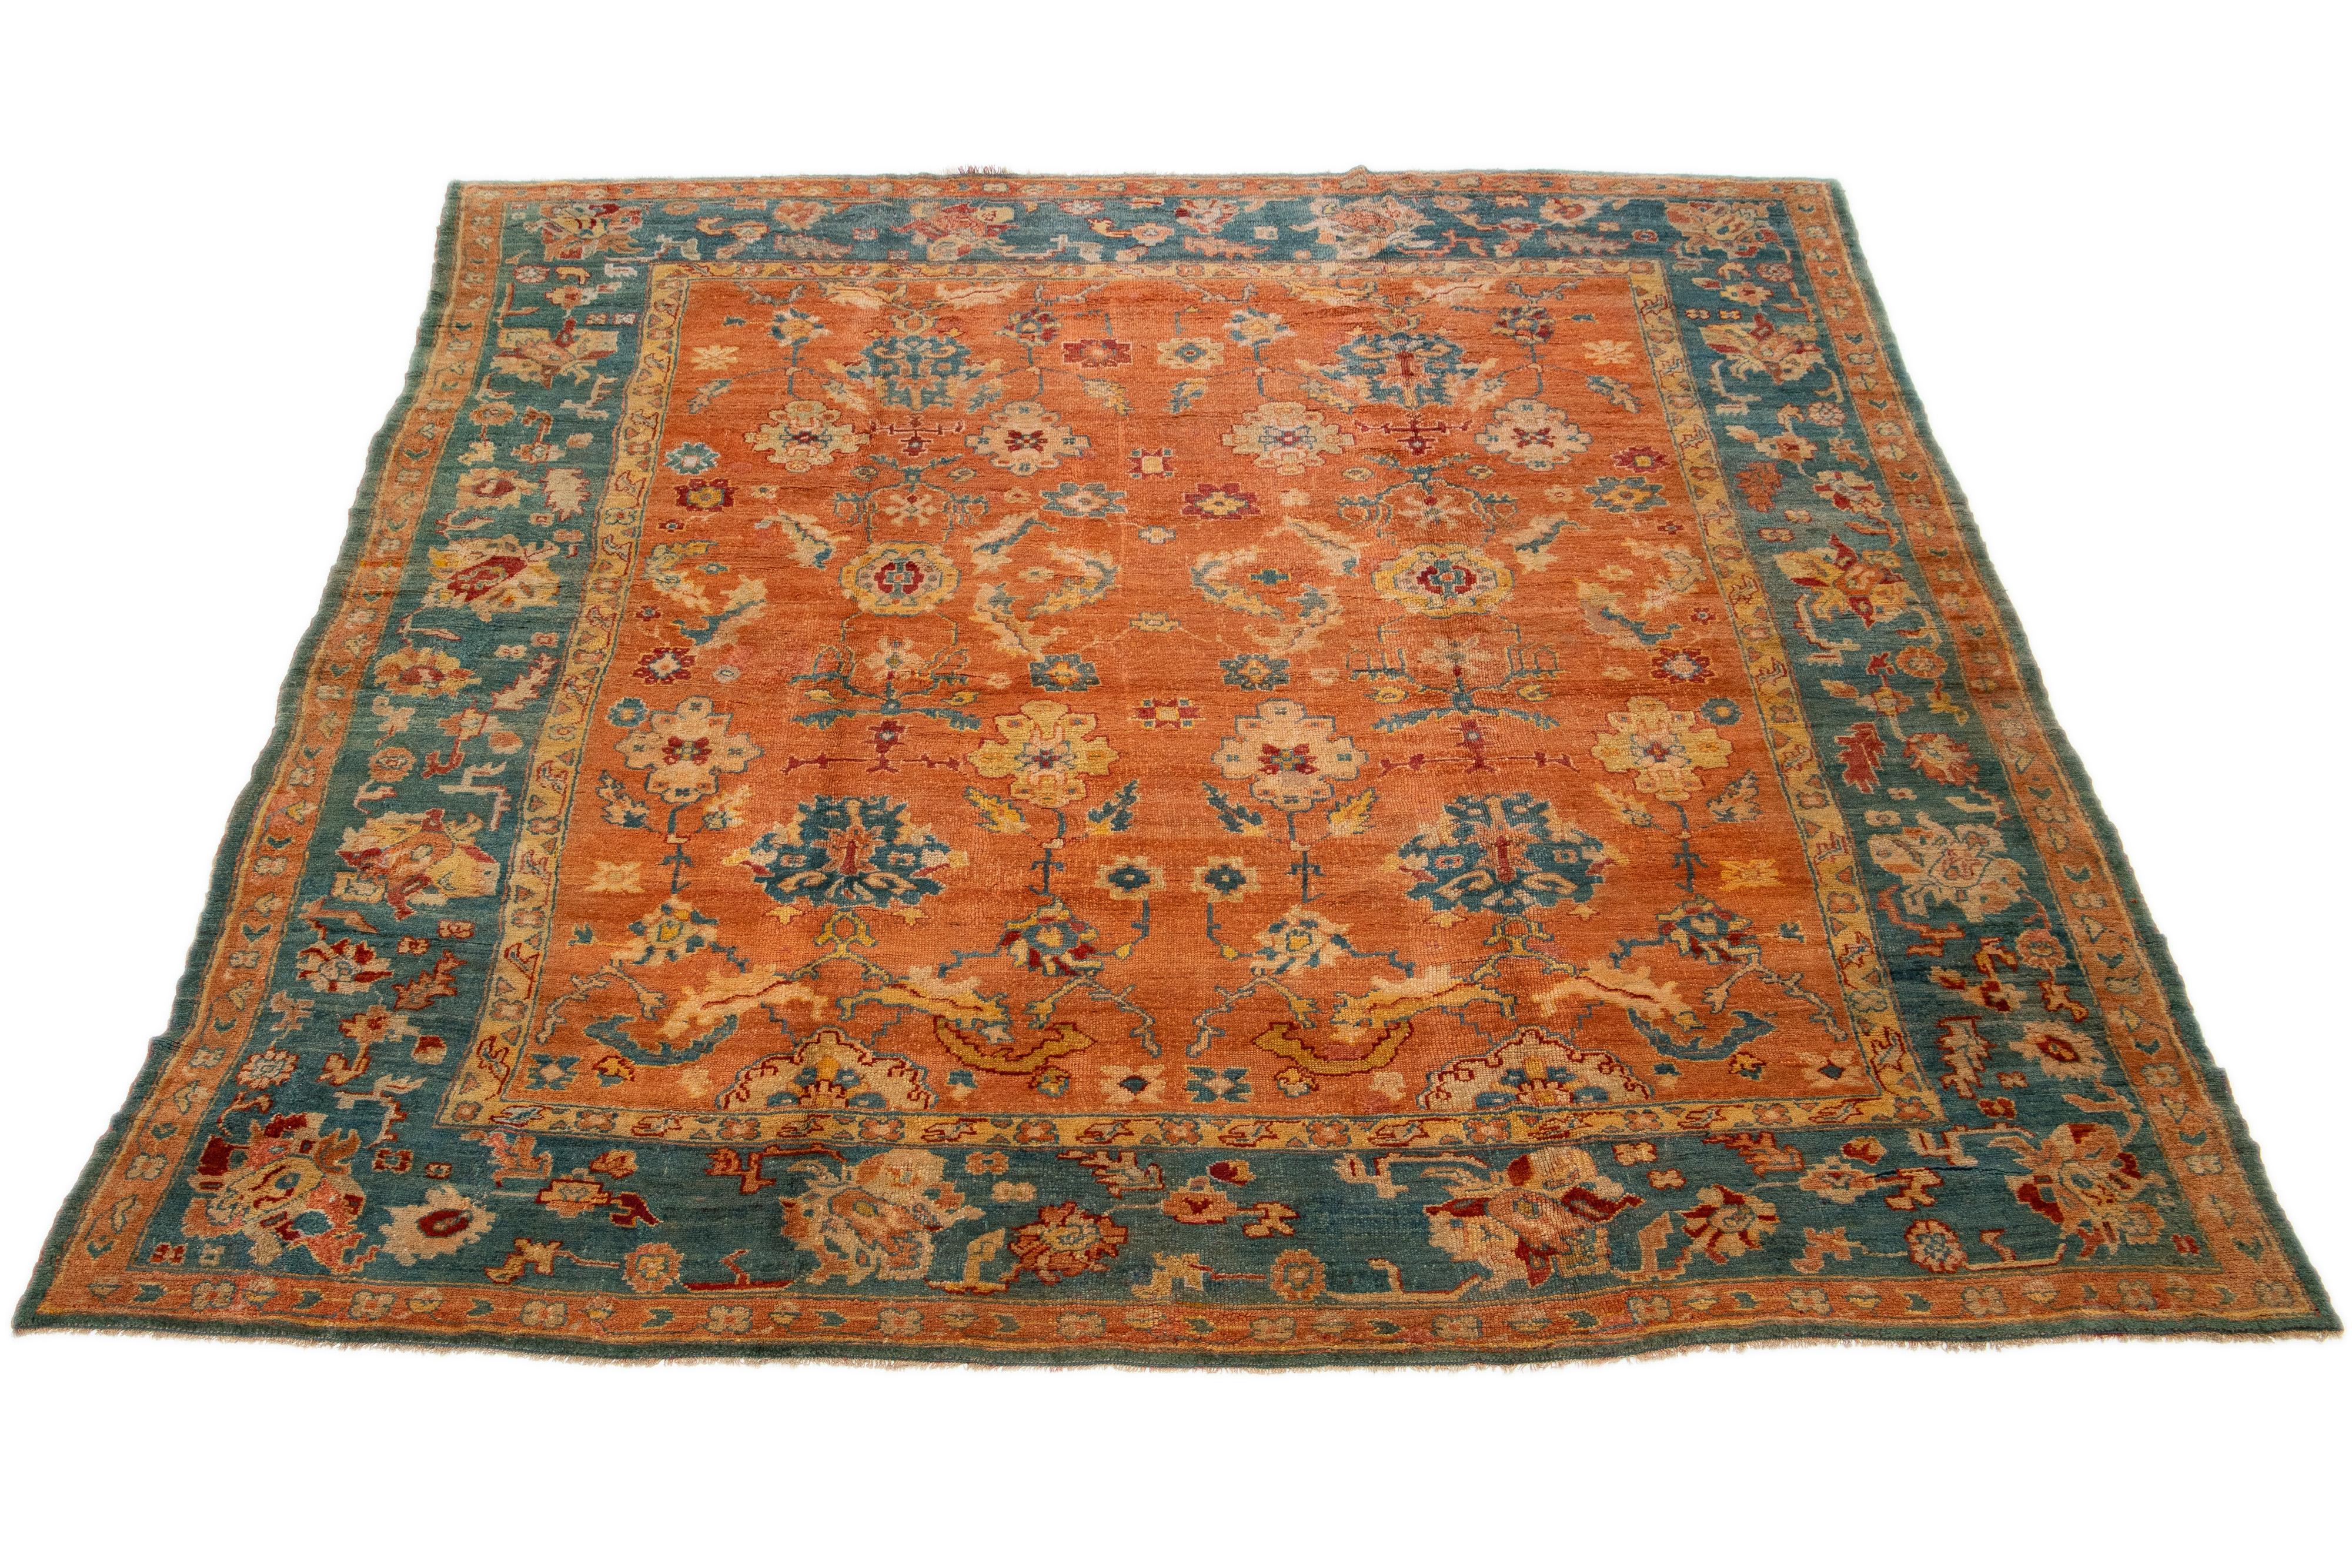 This Turkish Oushak rug is truly one-of-a-kind. It has been expertly hand-knotted using premium-quality wool and boasts a stunning orange field. The rug is framed with a bold blue border and adorned with a vibrant all-over floral design featuring